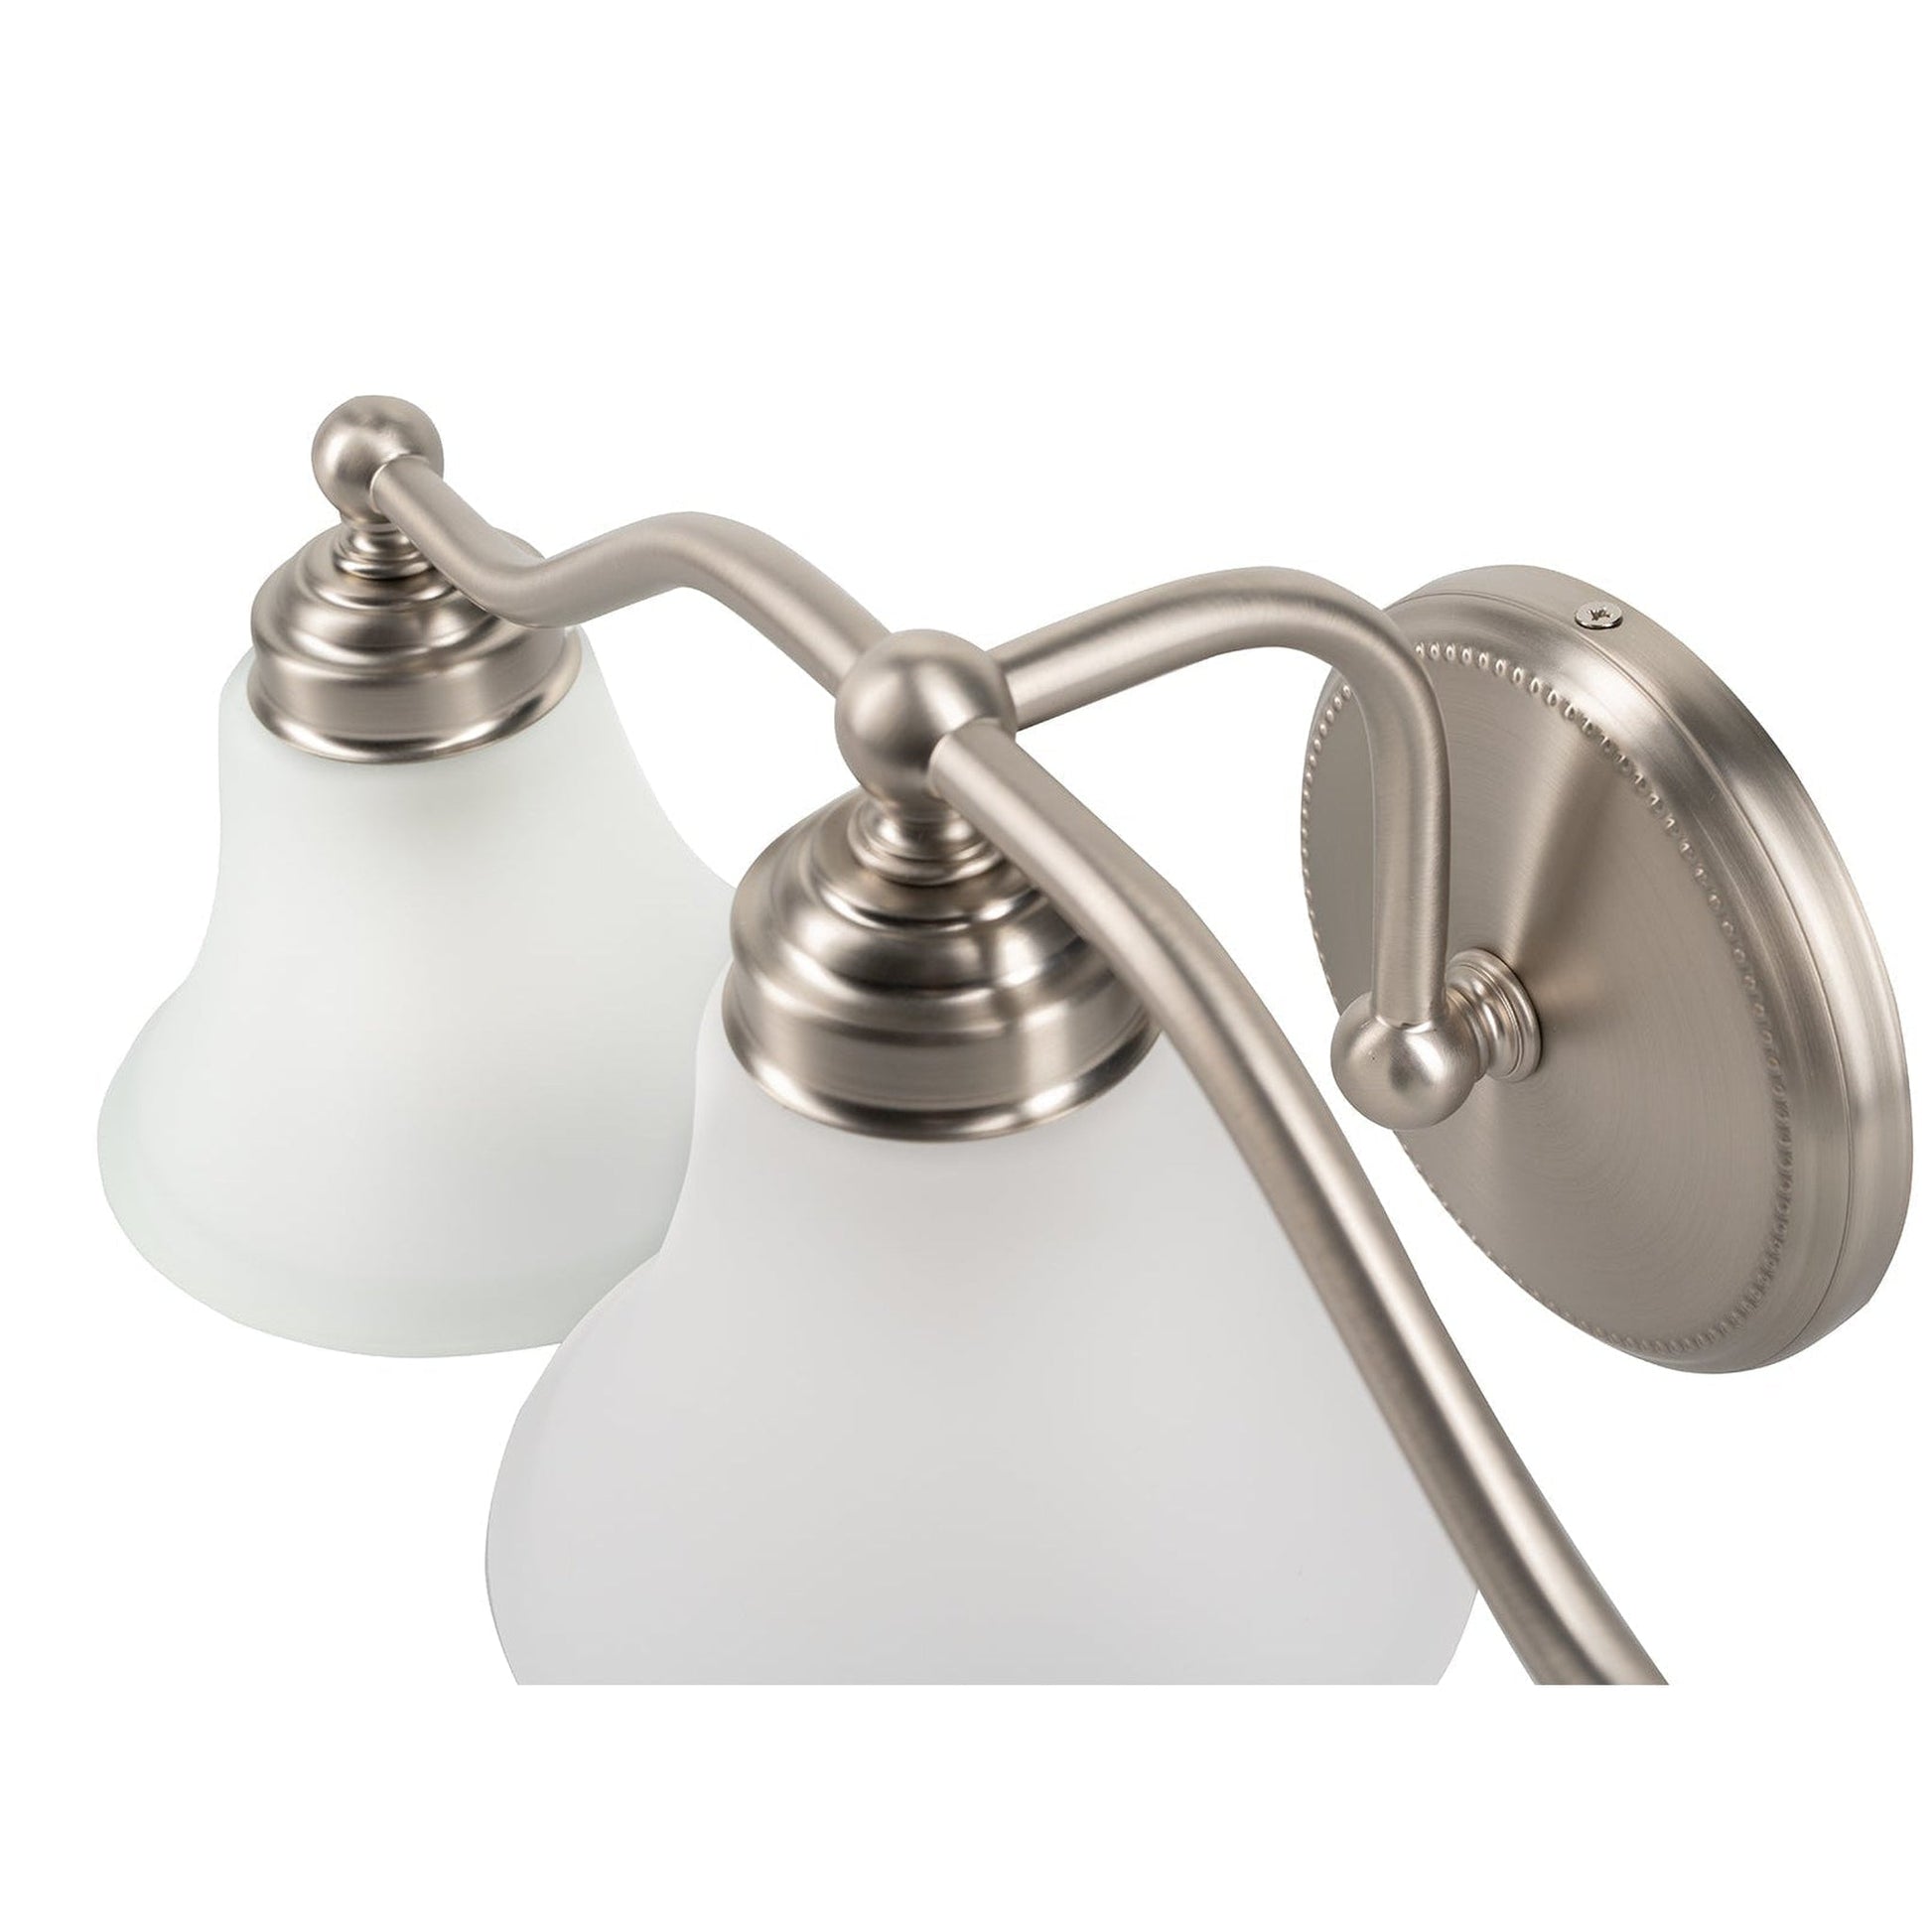 Norwell Lighting Soleil 9" x 22" 3-Light Sconce Brushed Nickel Vanity Light With Flared Glass Diffuser